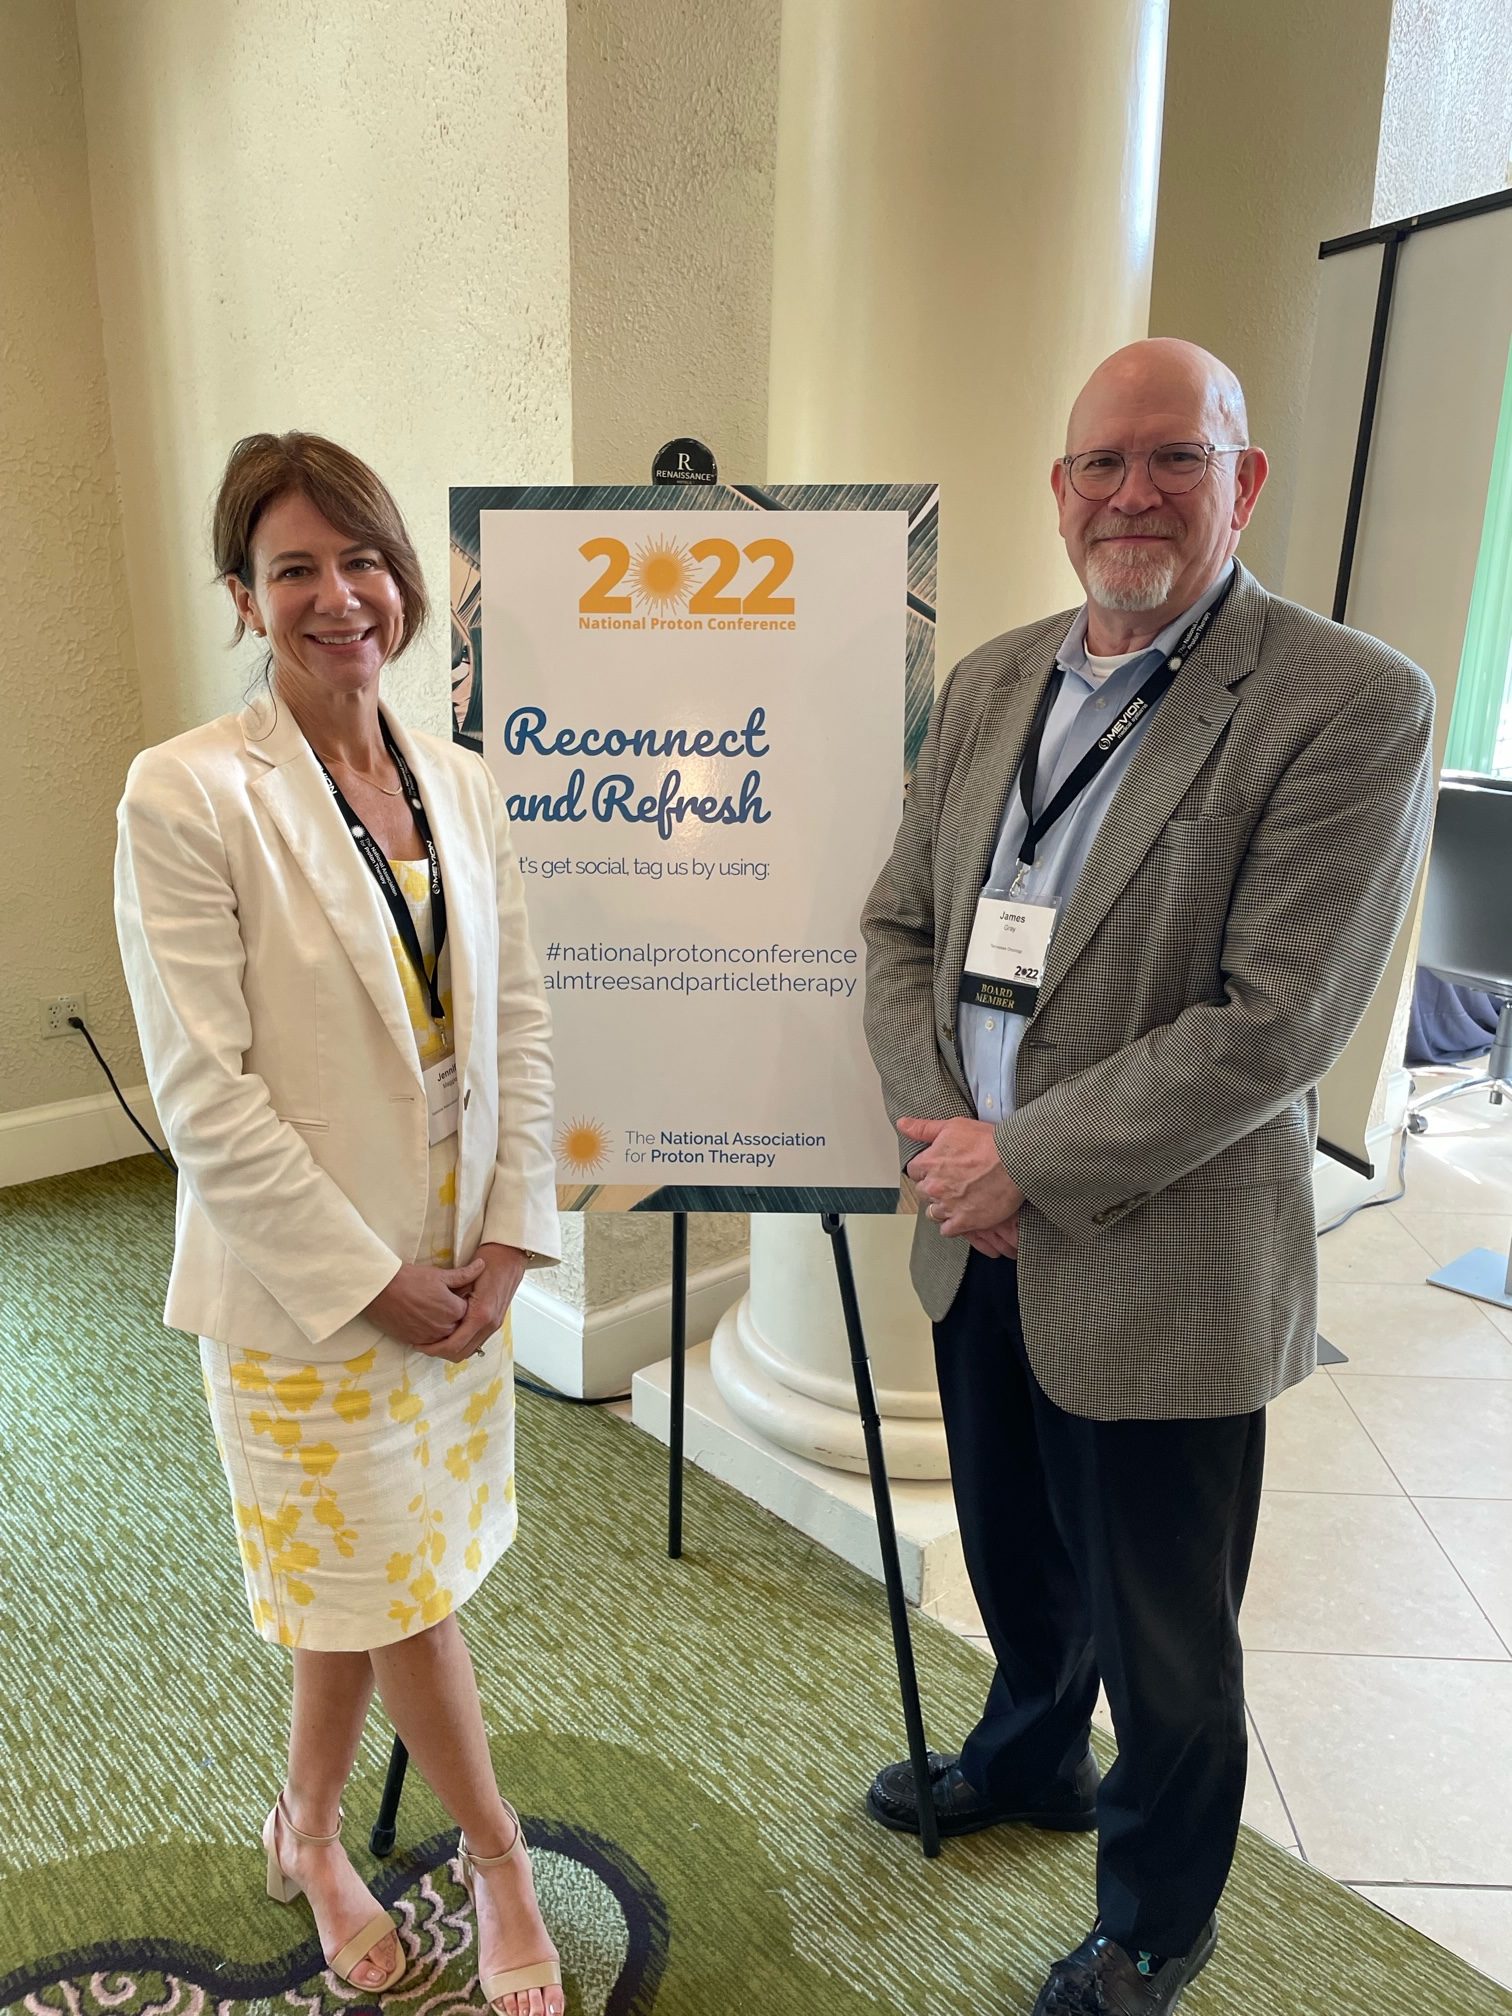 Jennifer Maggiore and Dr. James Gray attending the 2022 National Proton Conference